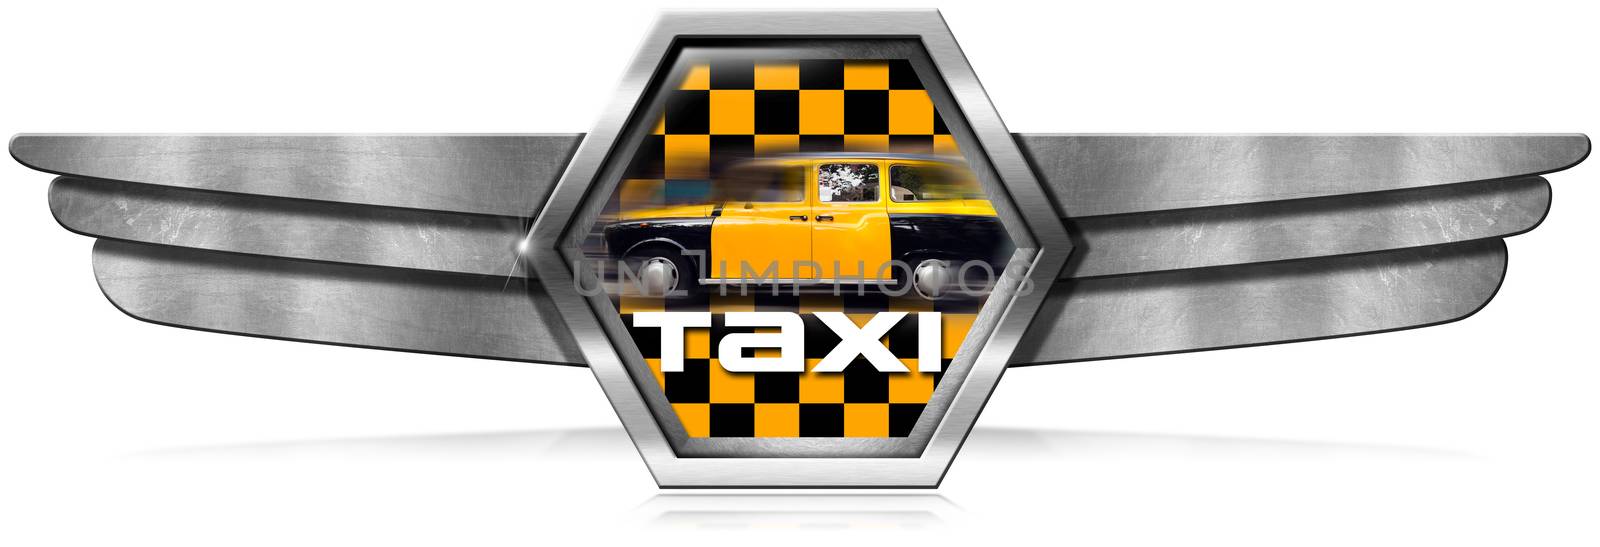 Taxi Service - Winged Metal Symbol by catalby